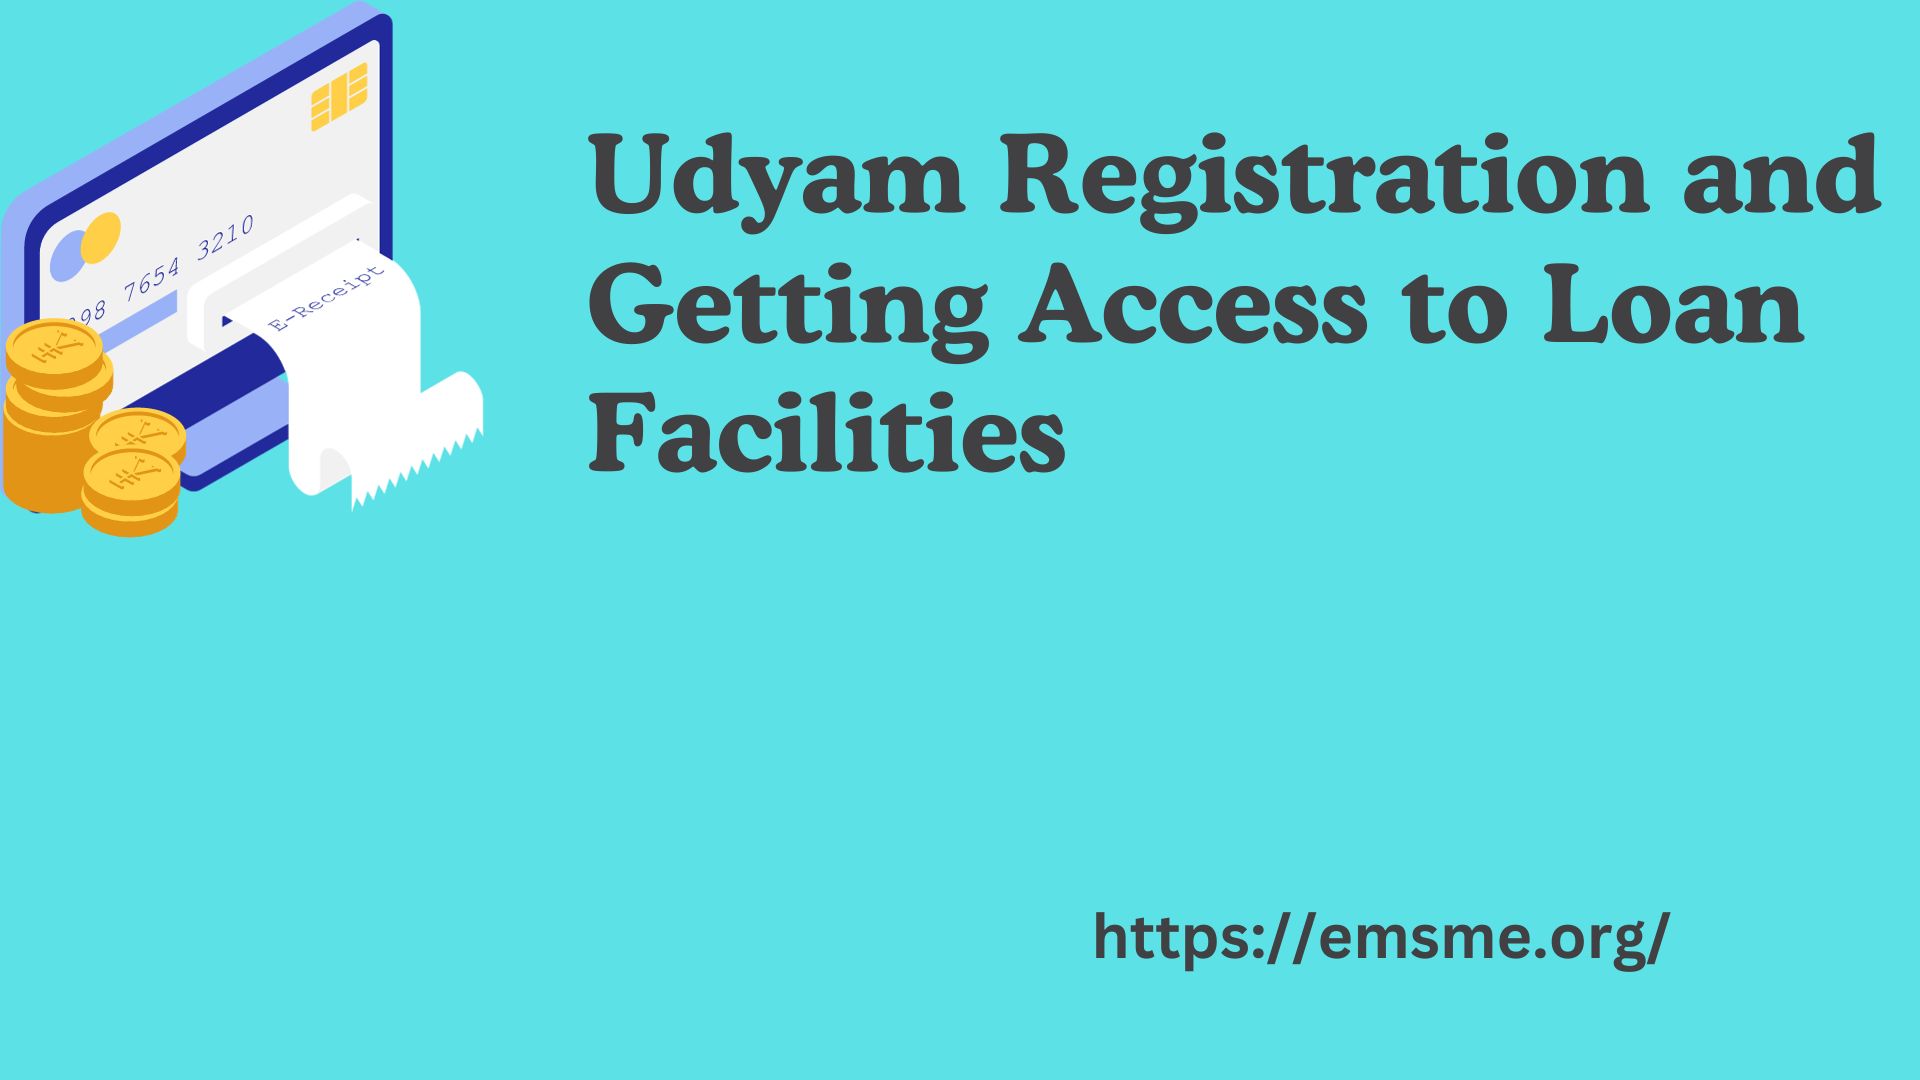 Udyam Registration and Getting Access to Loan Facilities